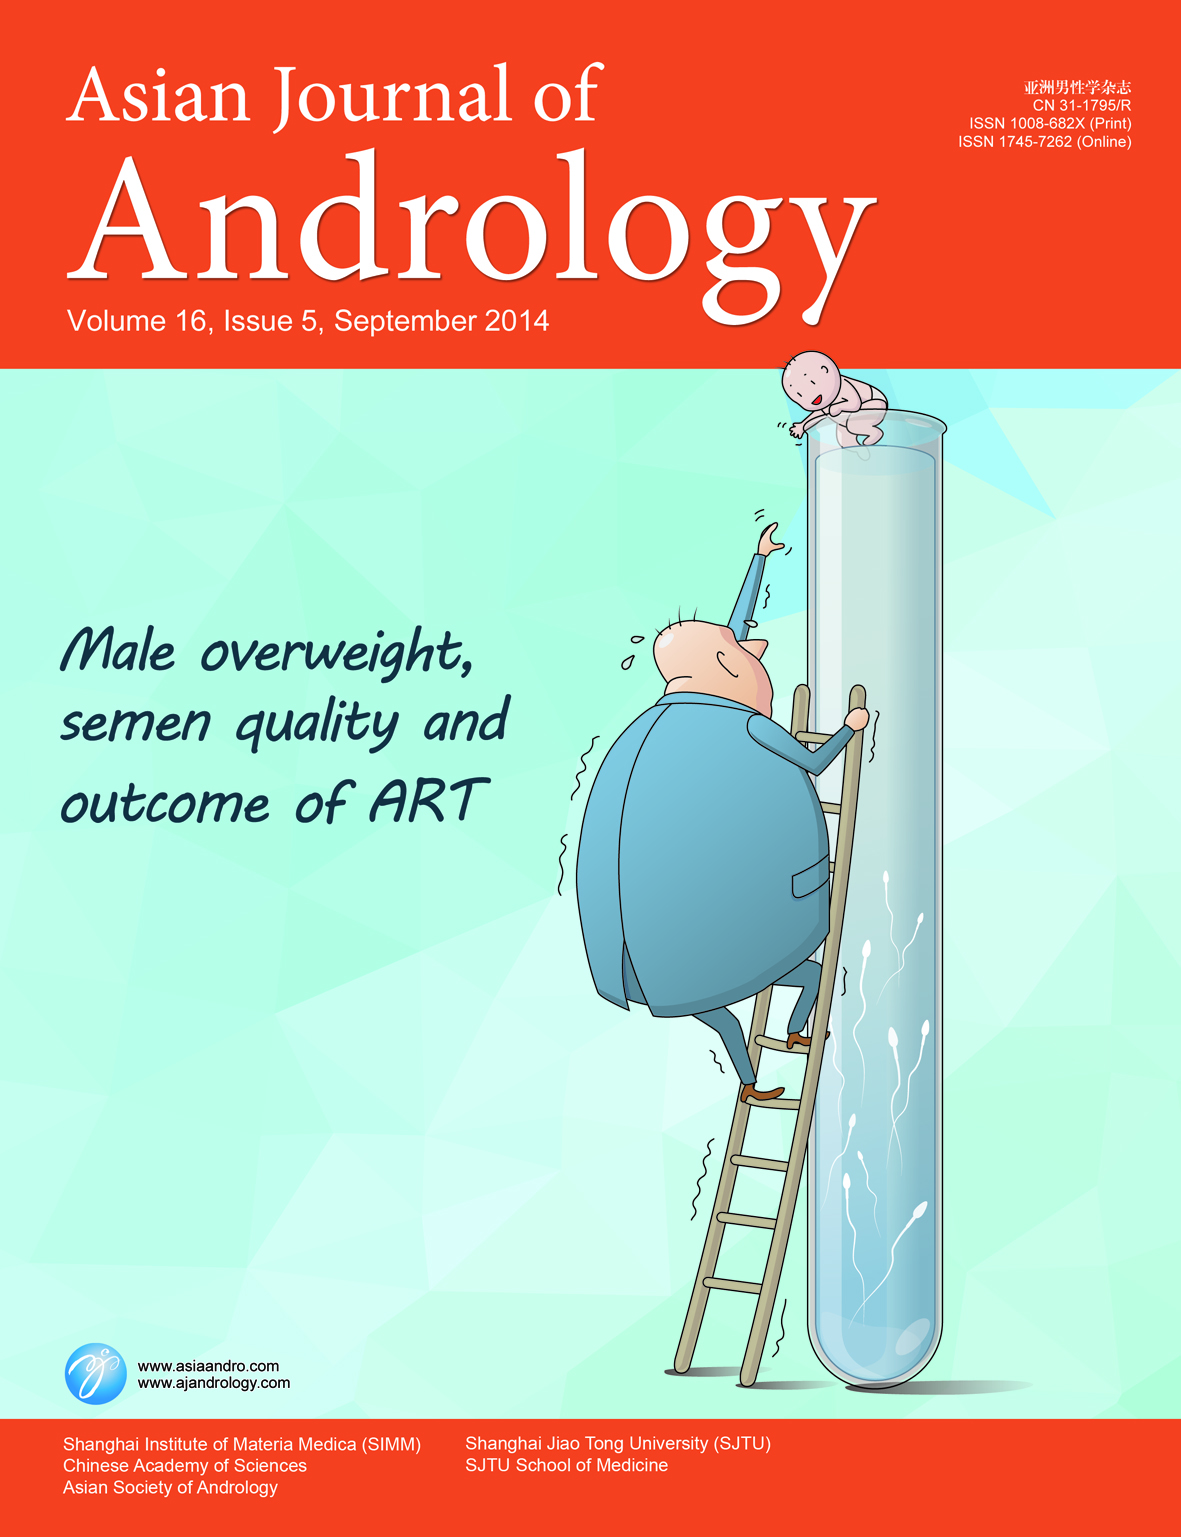 Asian Journal of Andrology